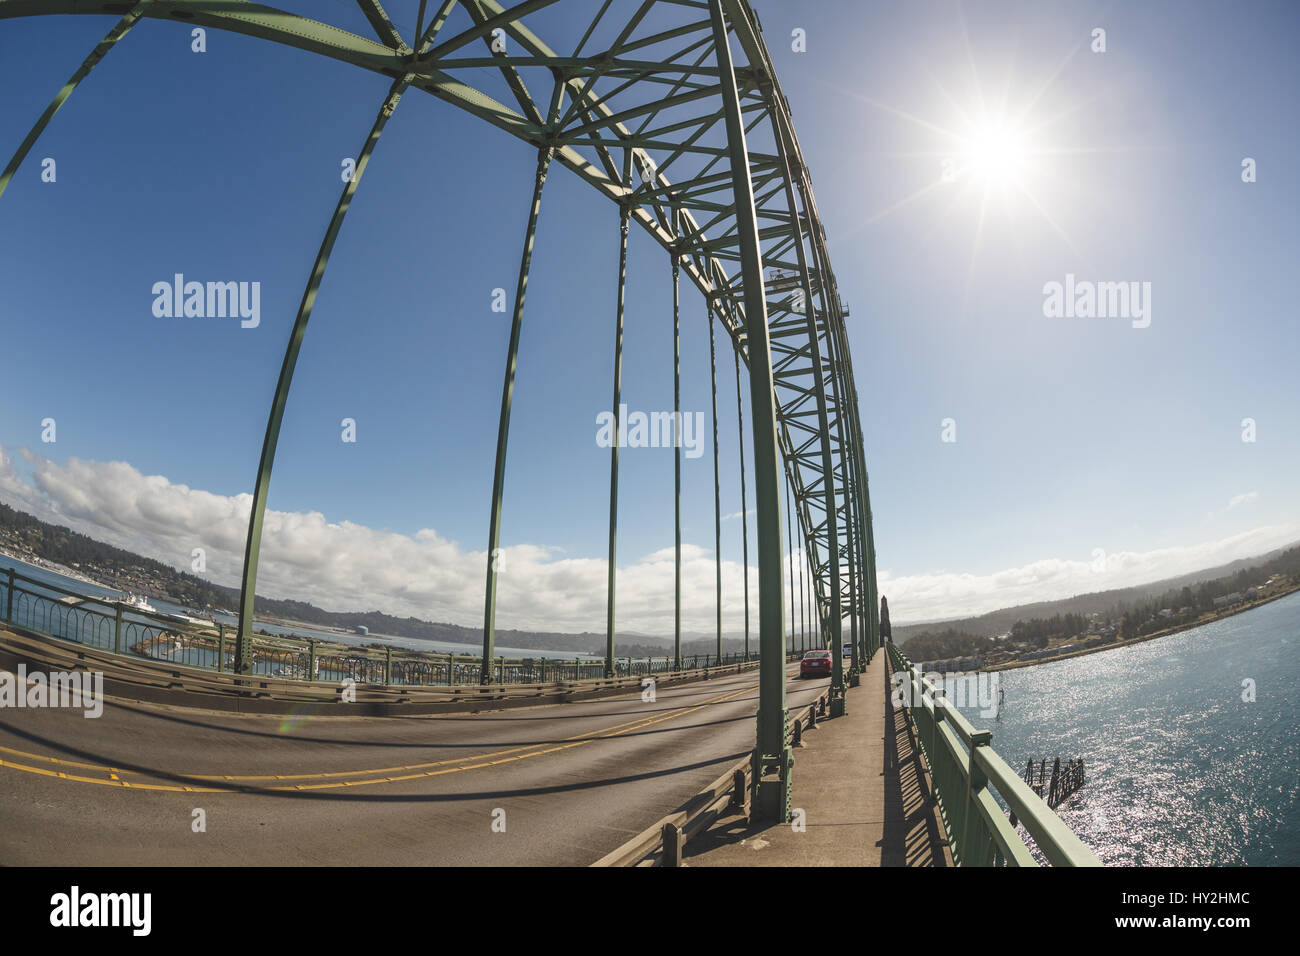 Yaquina Bay Bridge in Newport, Oregon, USA. Sunny summer day on the Pacific Ocean at the famous bridge commonly called Newport Bridge. Stock Photo